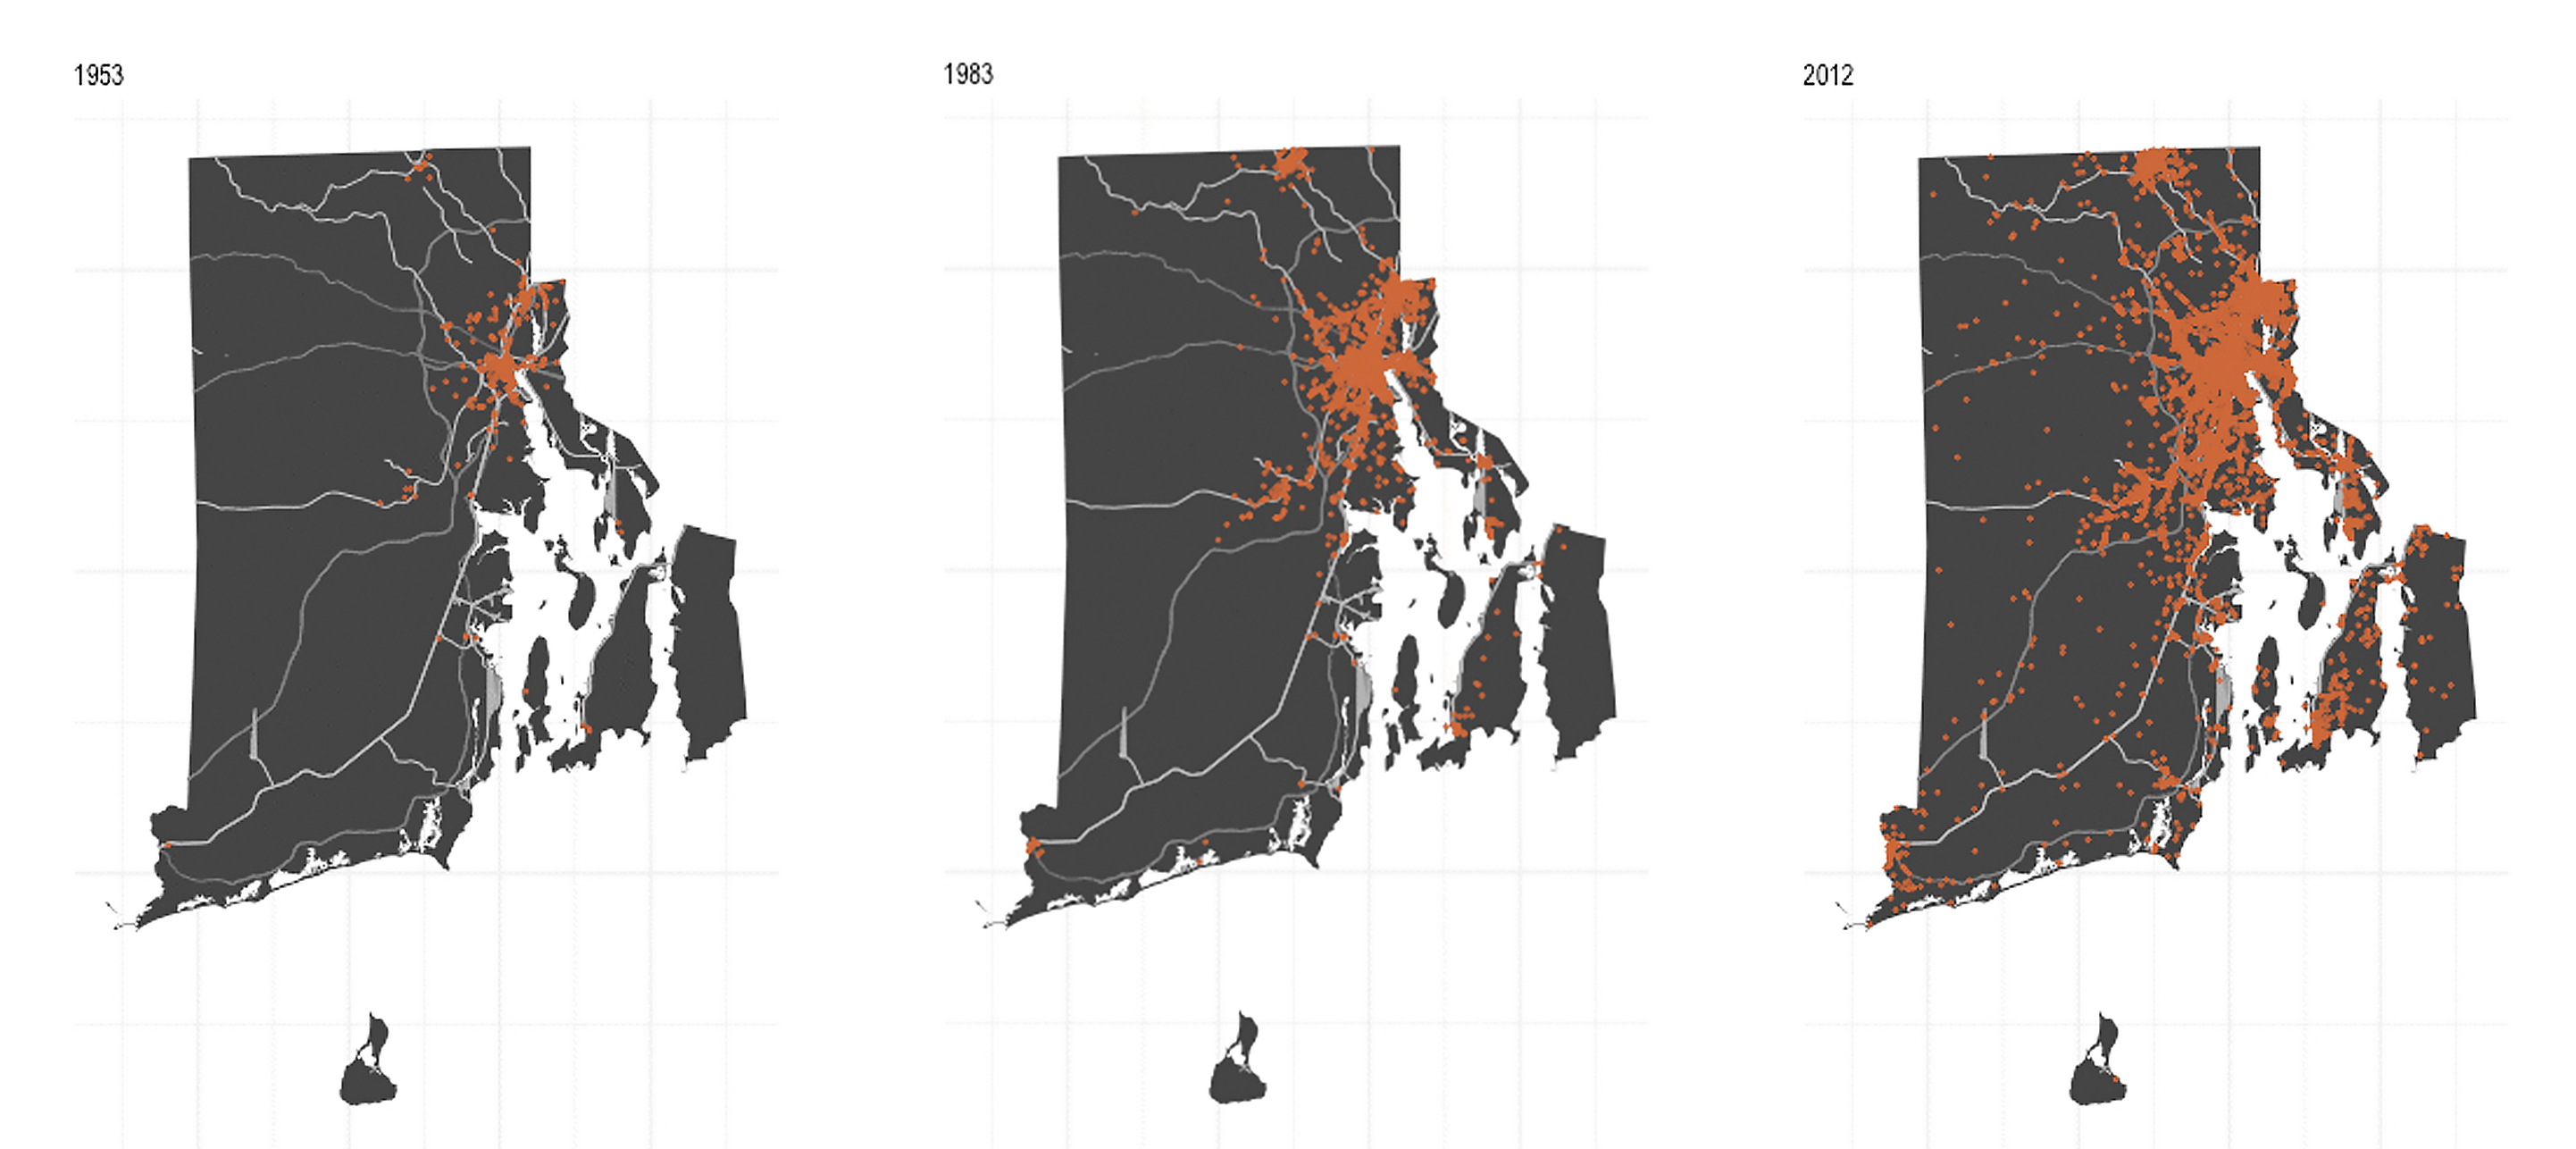 Map showing post-industrial sites across Rhode Island USA by Tom Marlow using data from the Rhode Island Directory of Manufacturers, 1953-2012.